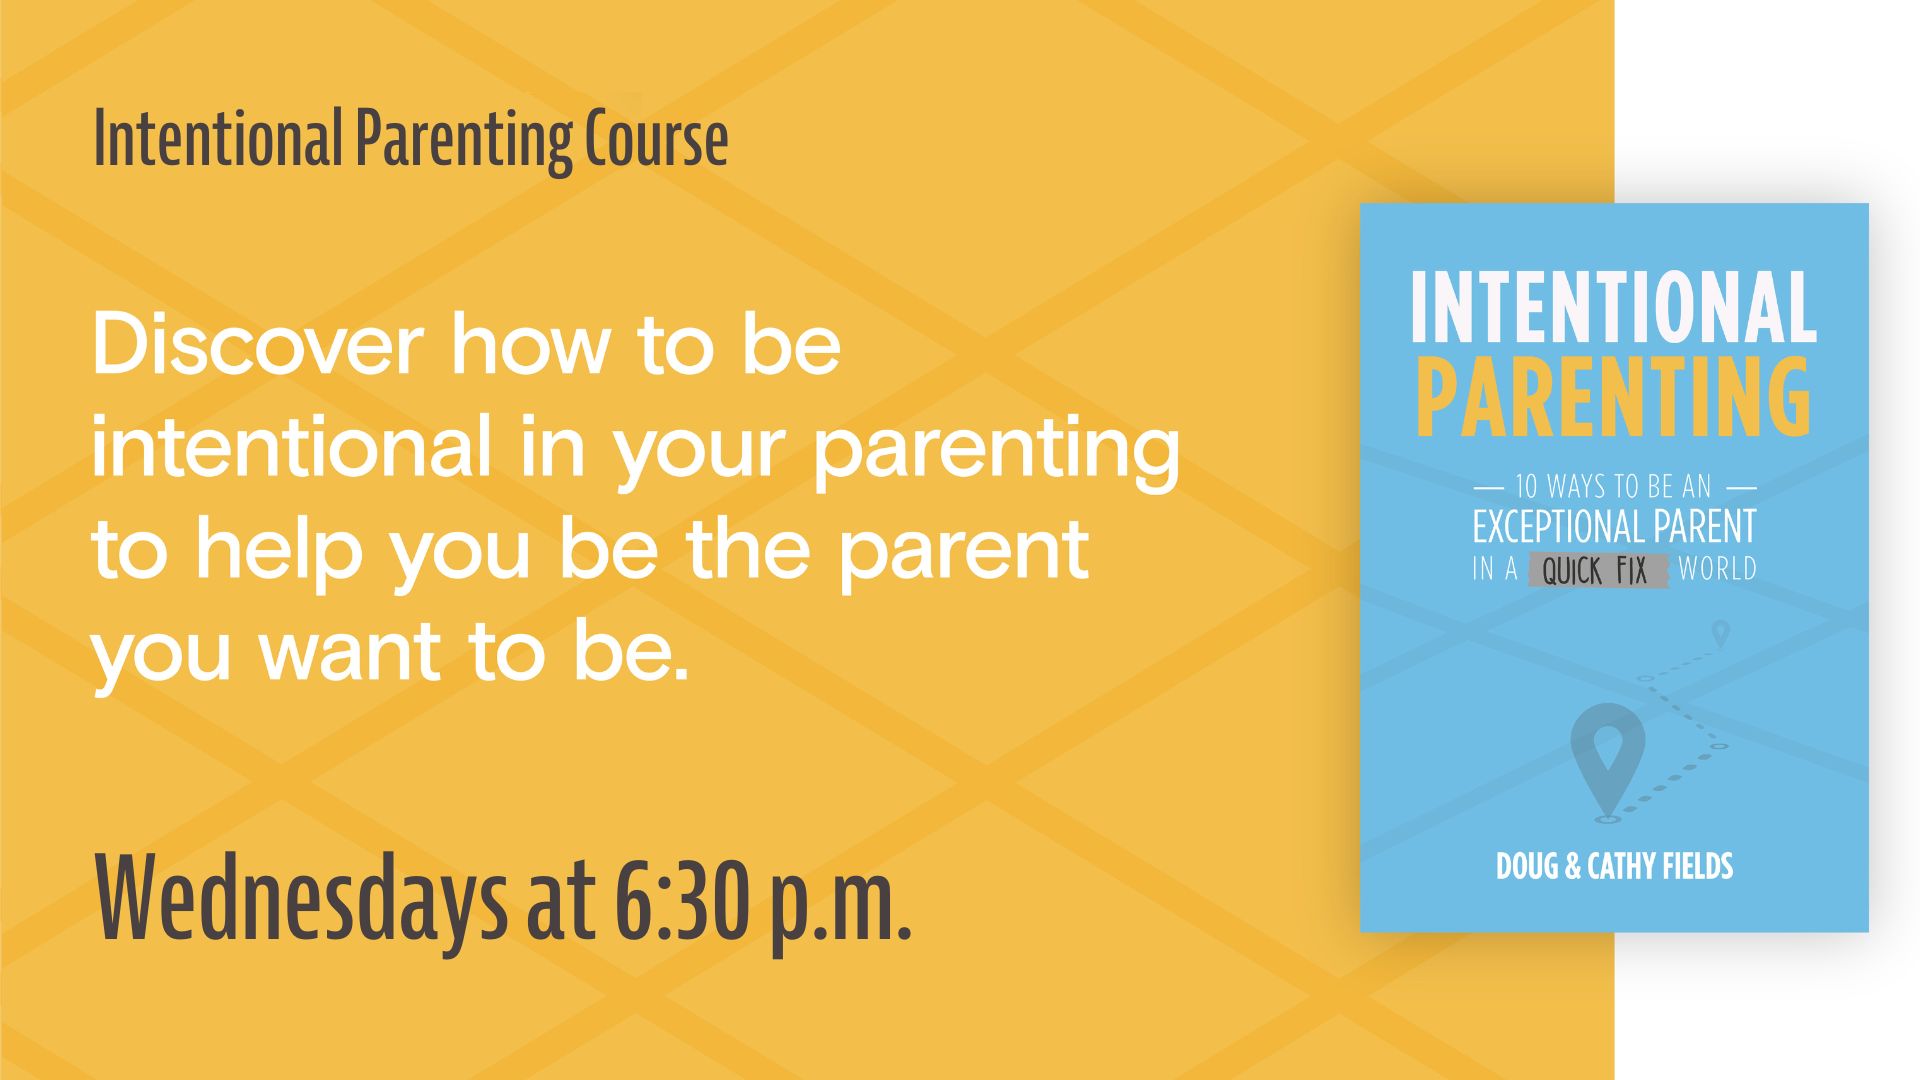 Image of a blue book with the words "Intentional Parenting" on the cover